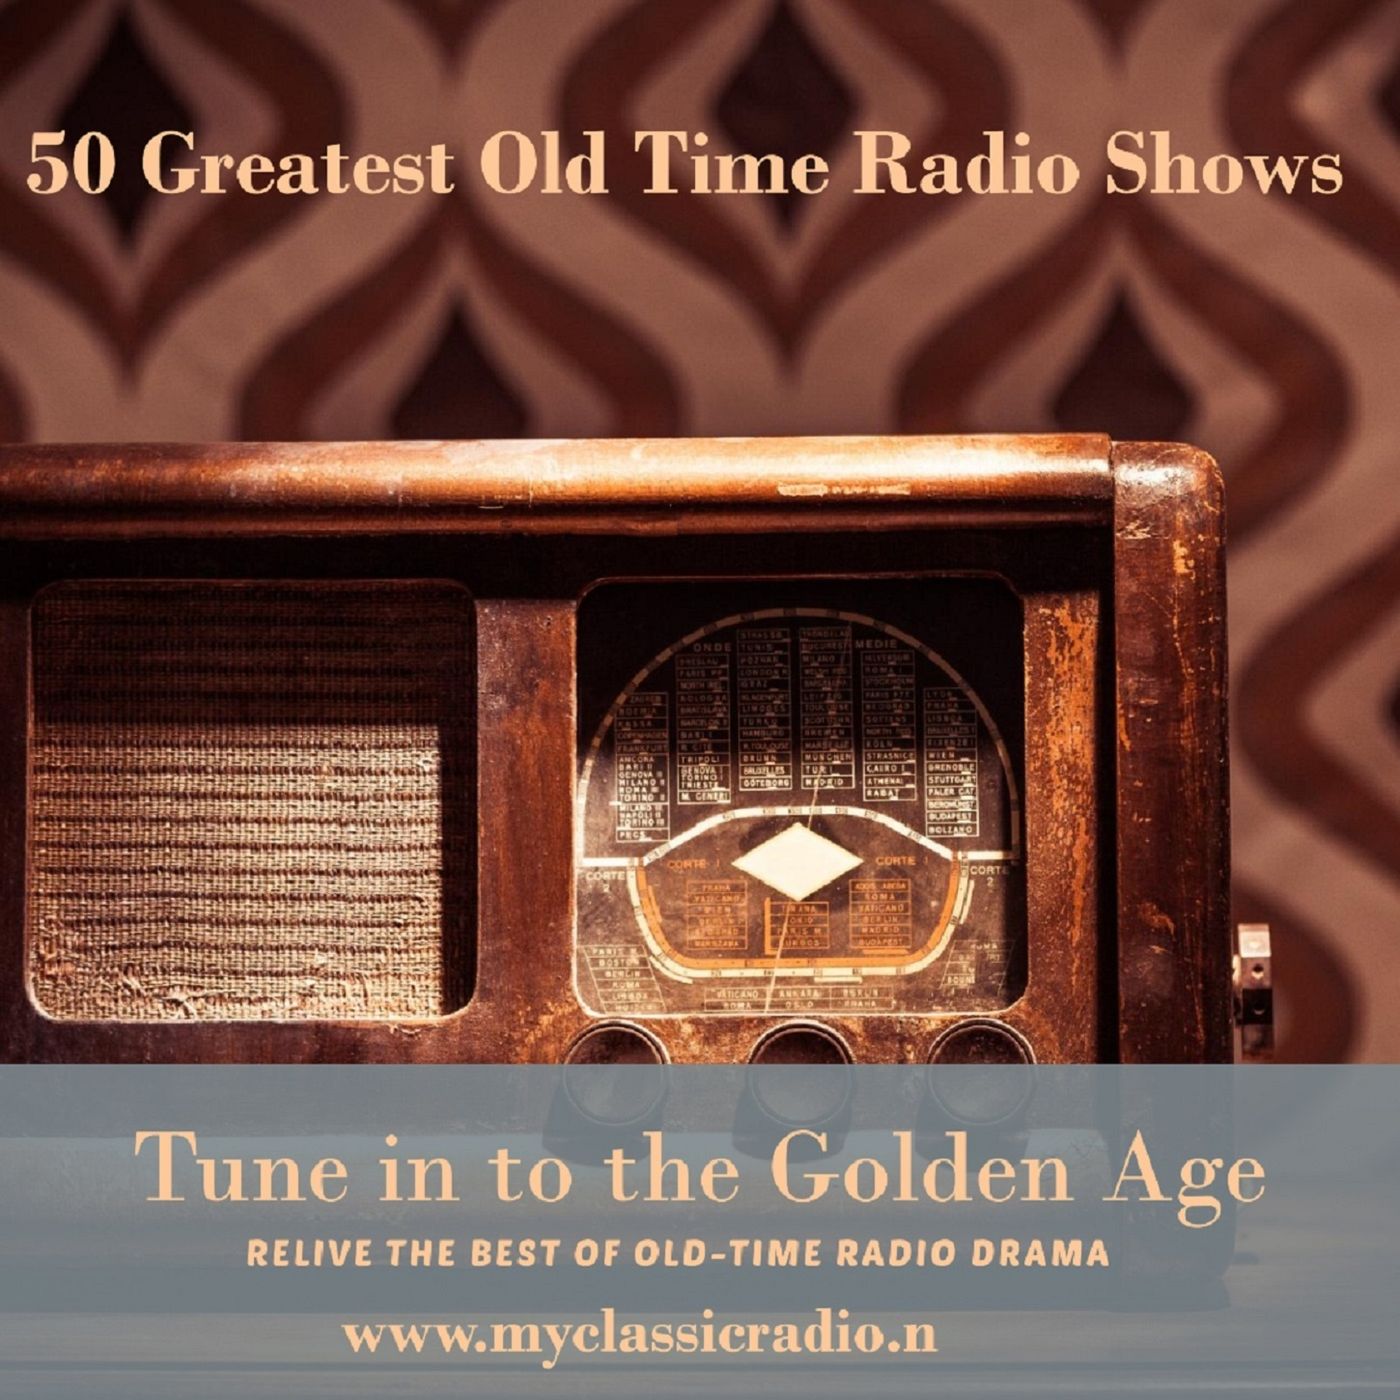 50 Greatest Old Time Radio Shows